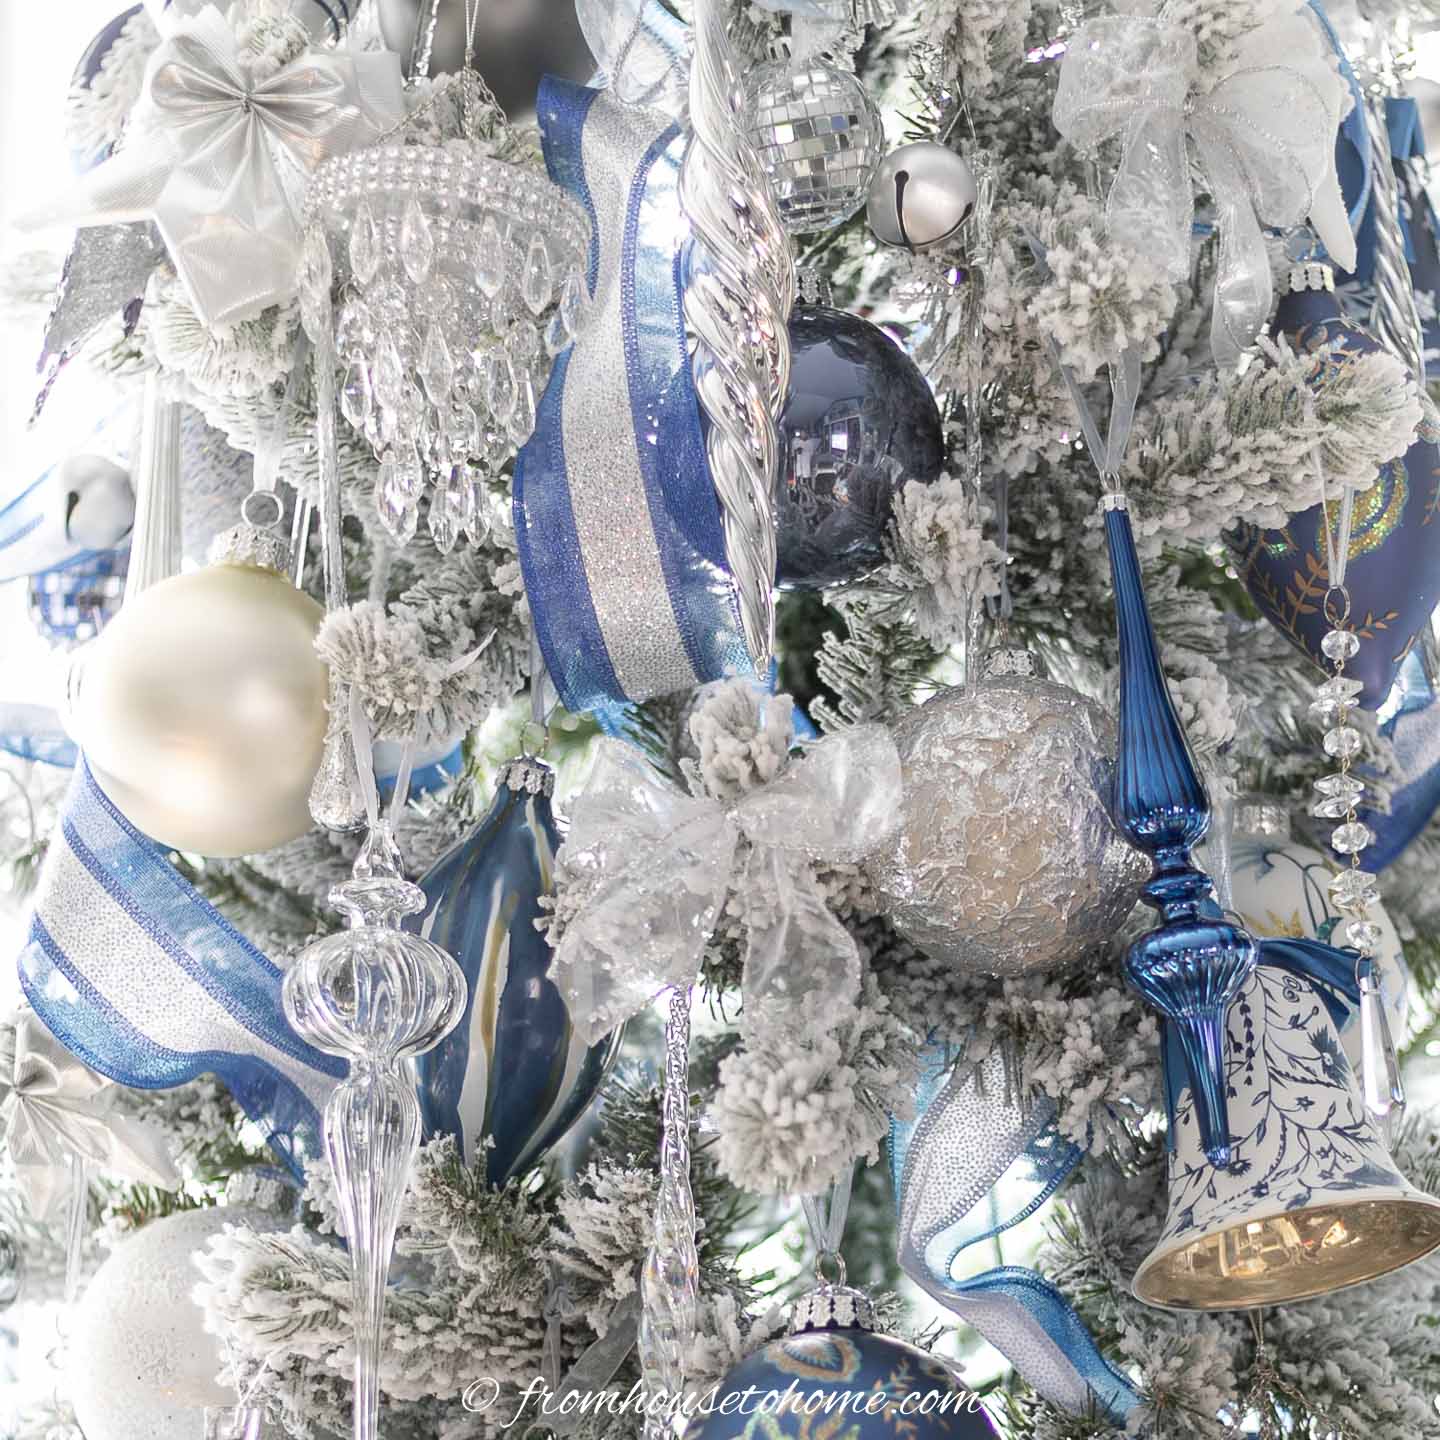 Large ball ornaments, ribbons and crystal ornaments on a flocked christmas tree